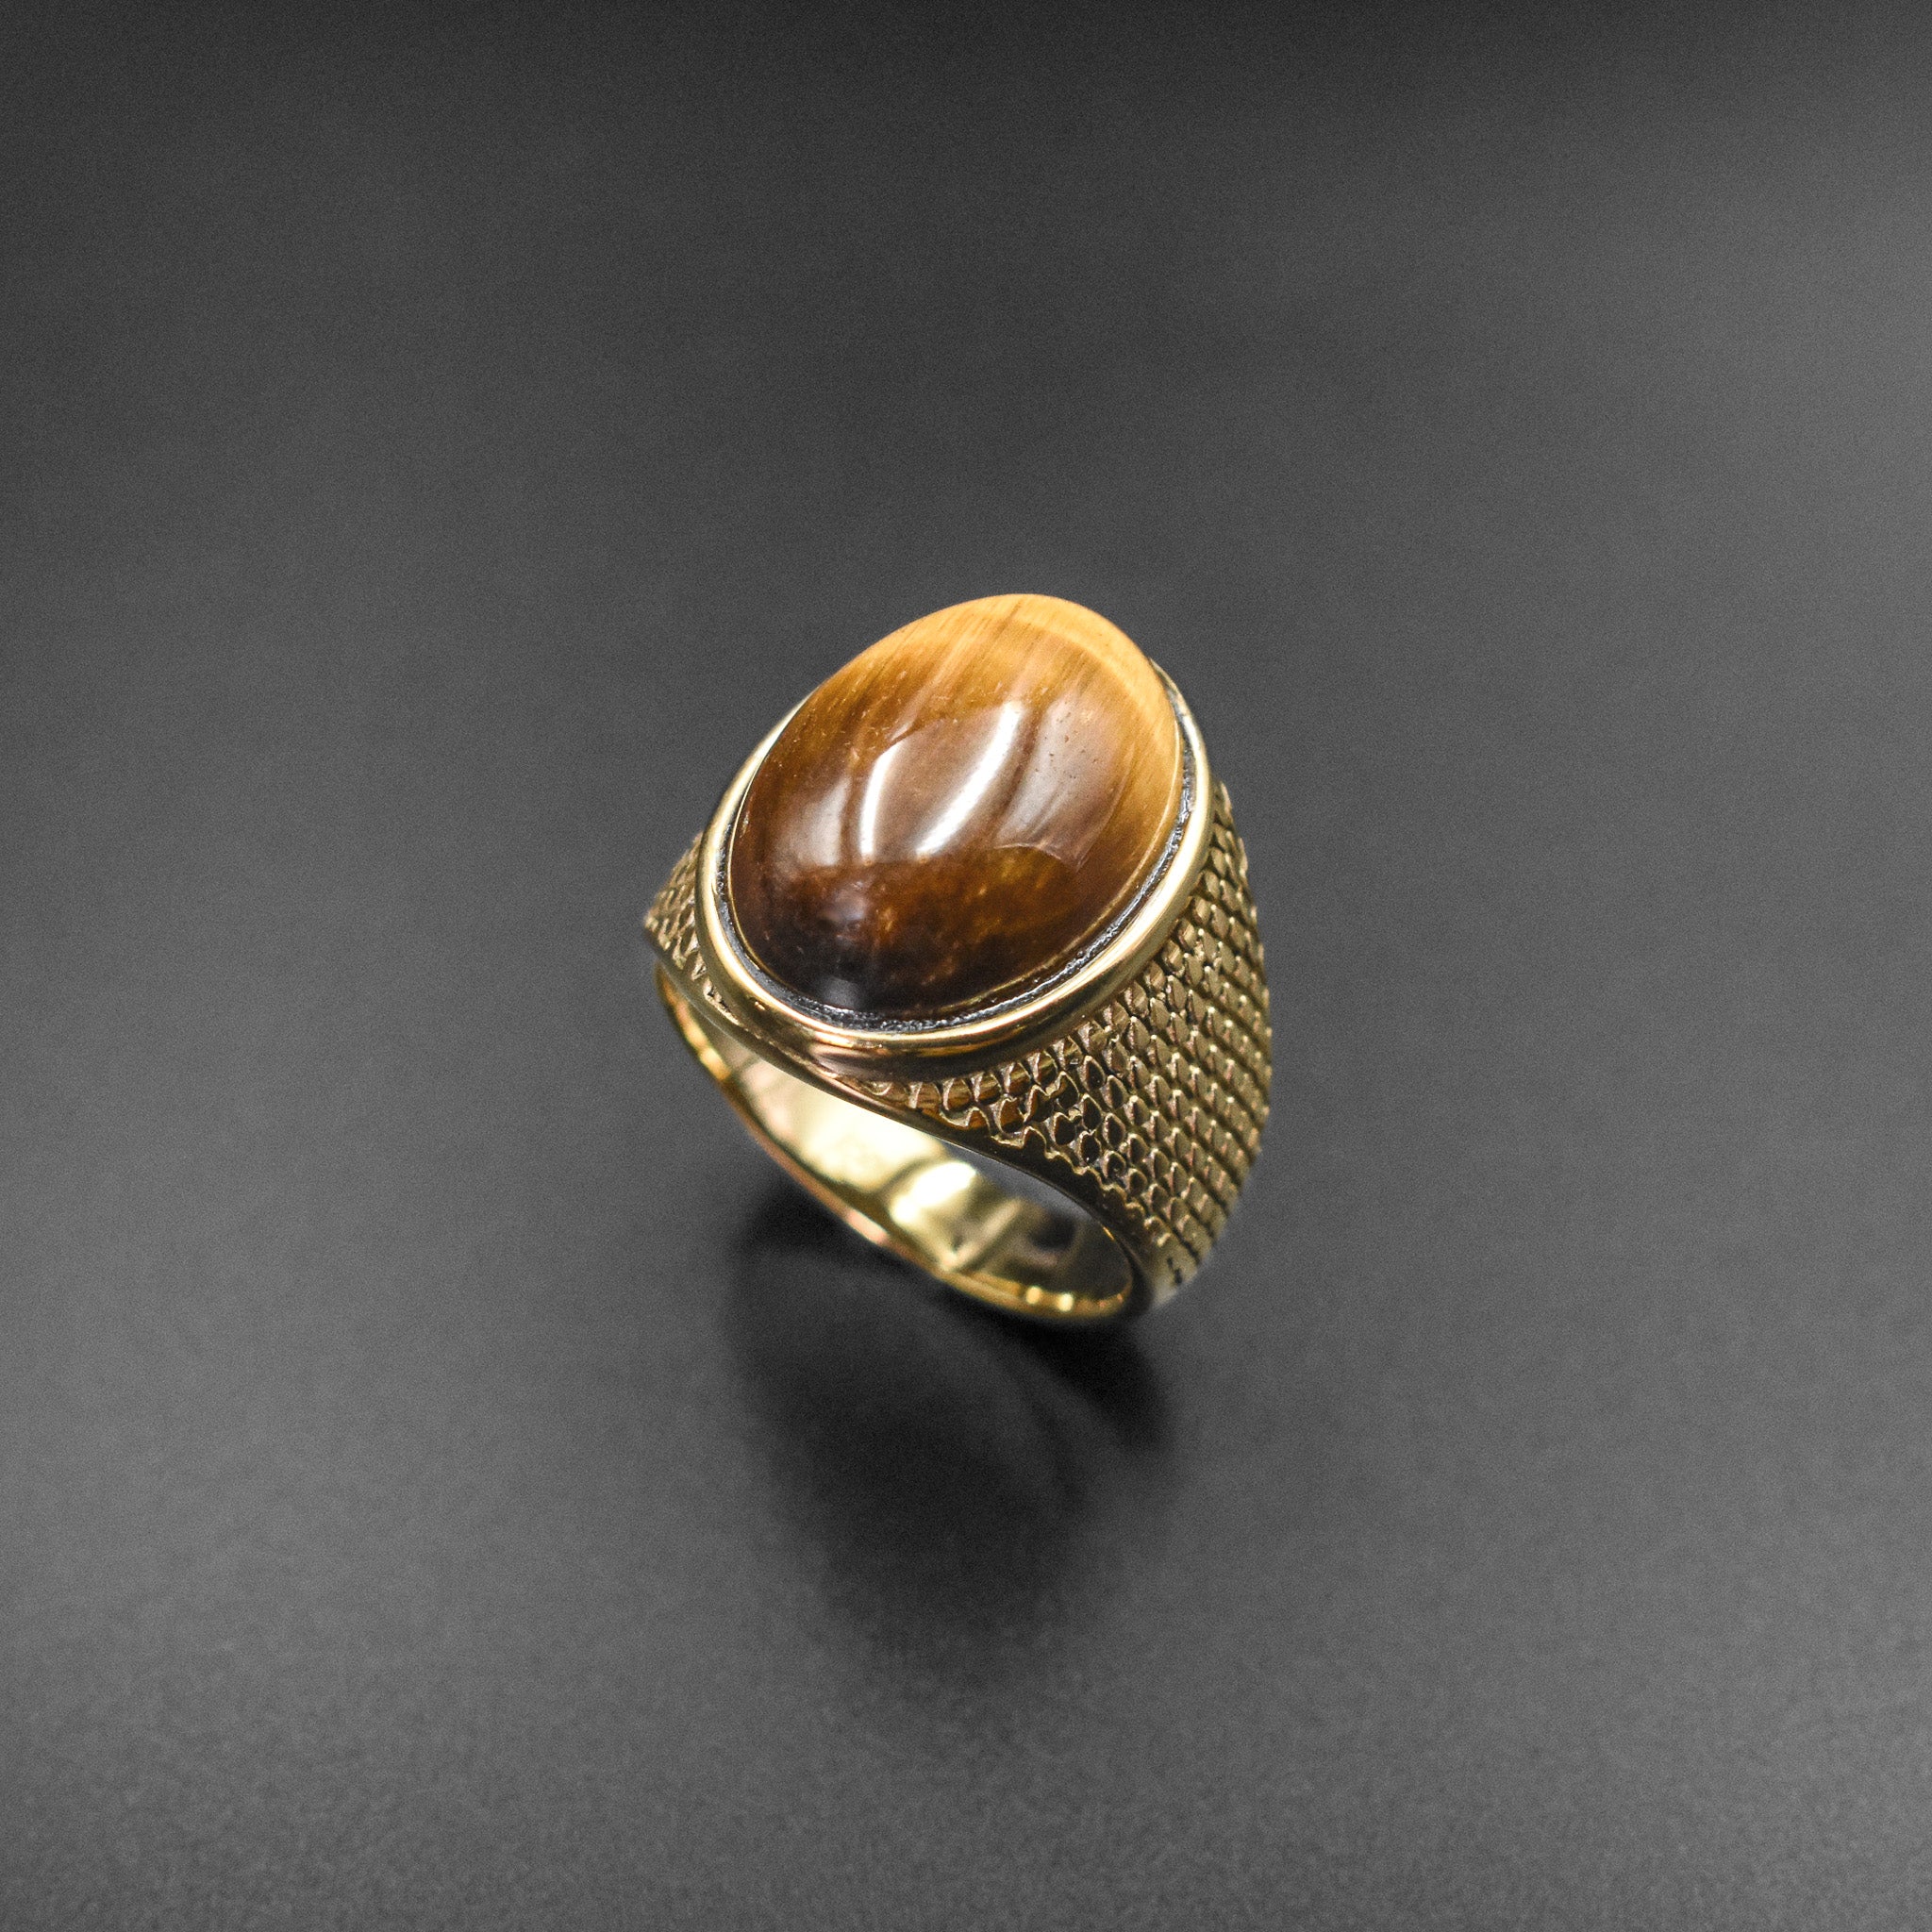 Buy Tiger Eye Statement Ring Gold Engraved Ring Tiger Eye Ring Brown Gemstone  Ring Shiny Gold Ring Gift for Mom Online in India - Etsy